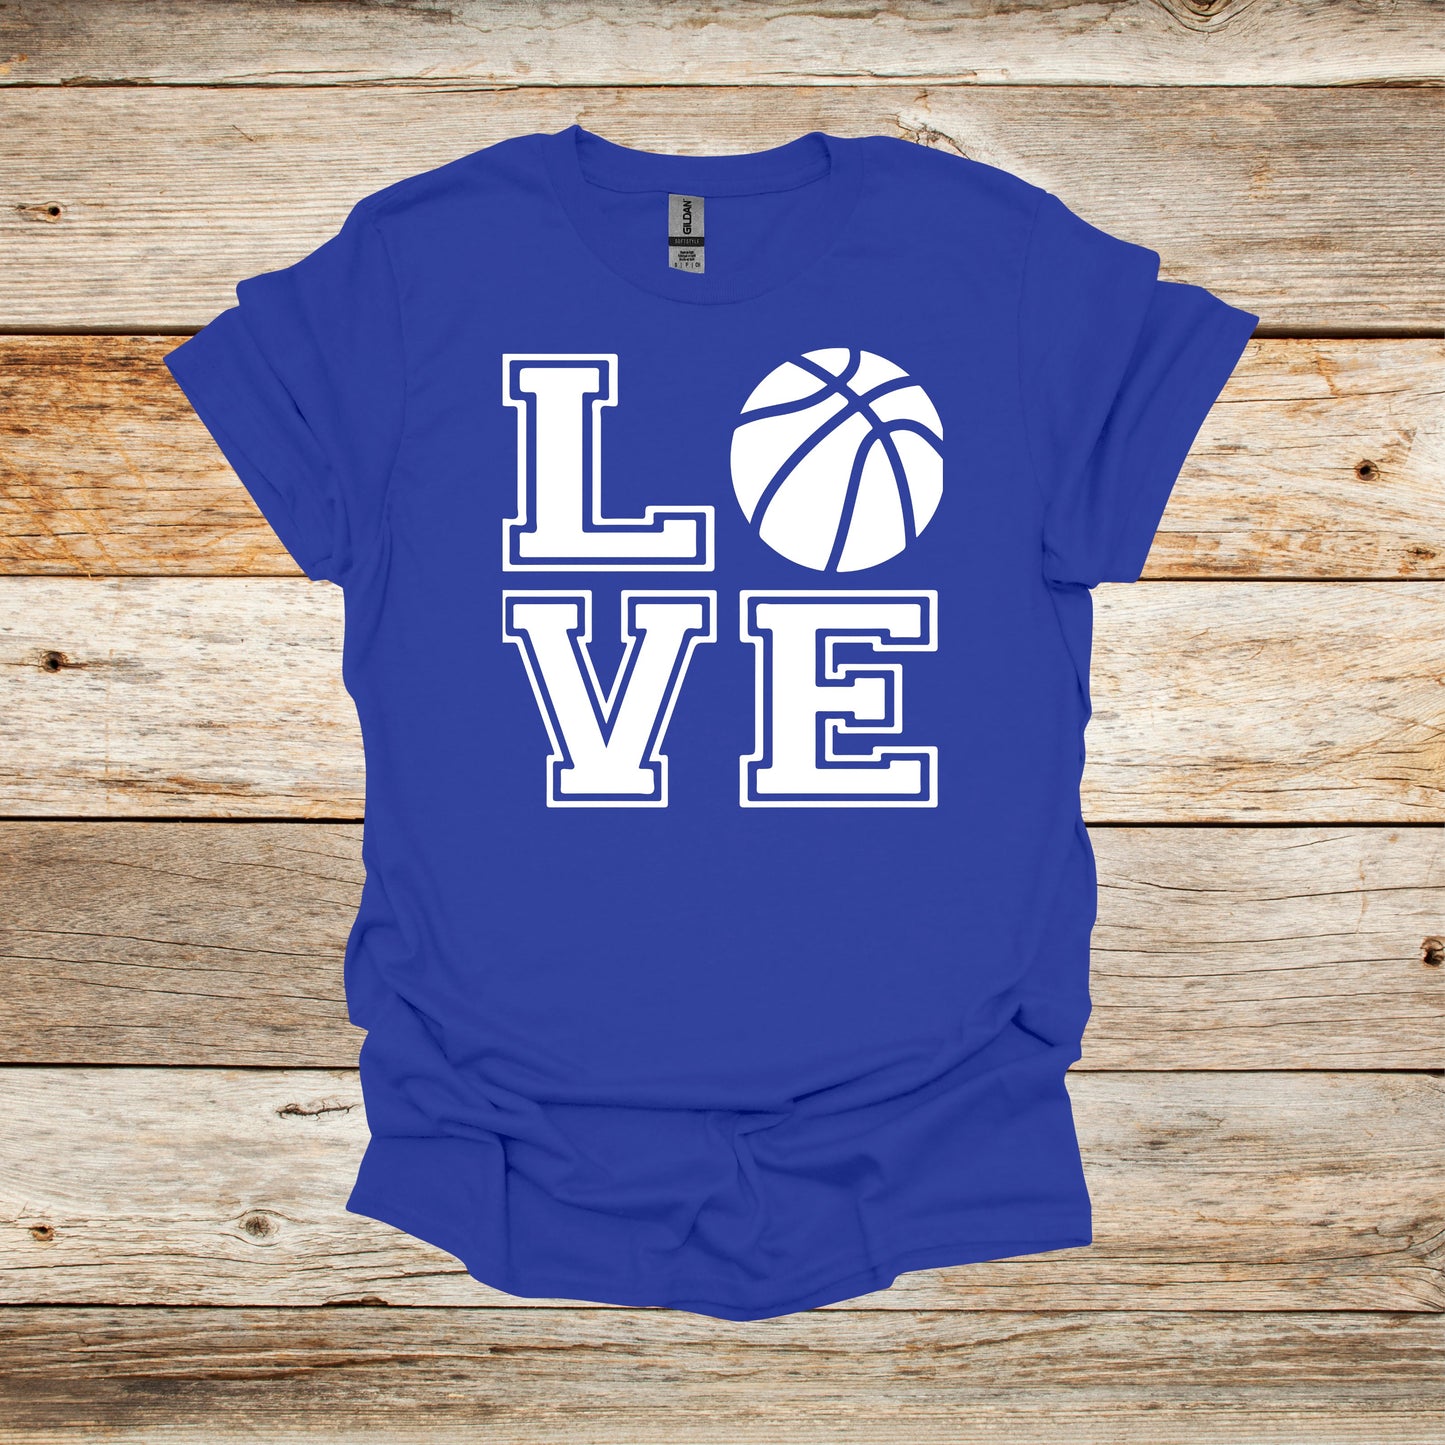 Basketball T-Shirt - Adult and Children's Tee Shirts - Sports T-Shirts Graphic Avenue Royal Blue Adult Small 